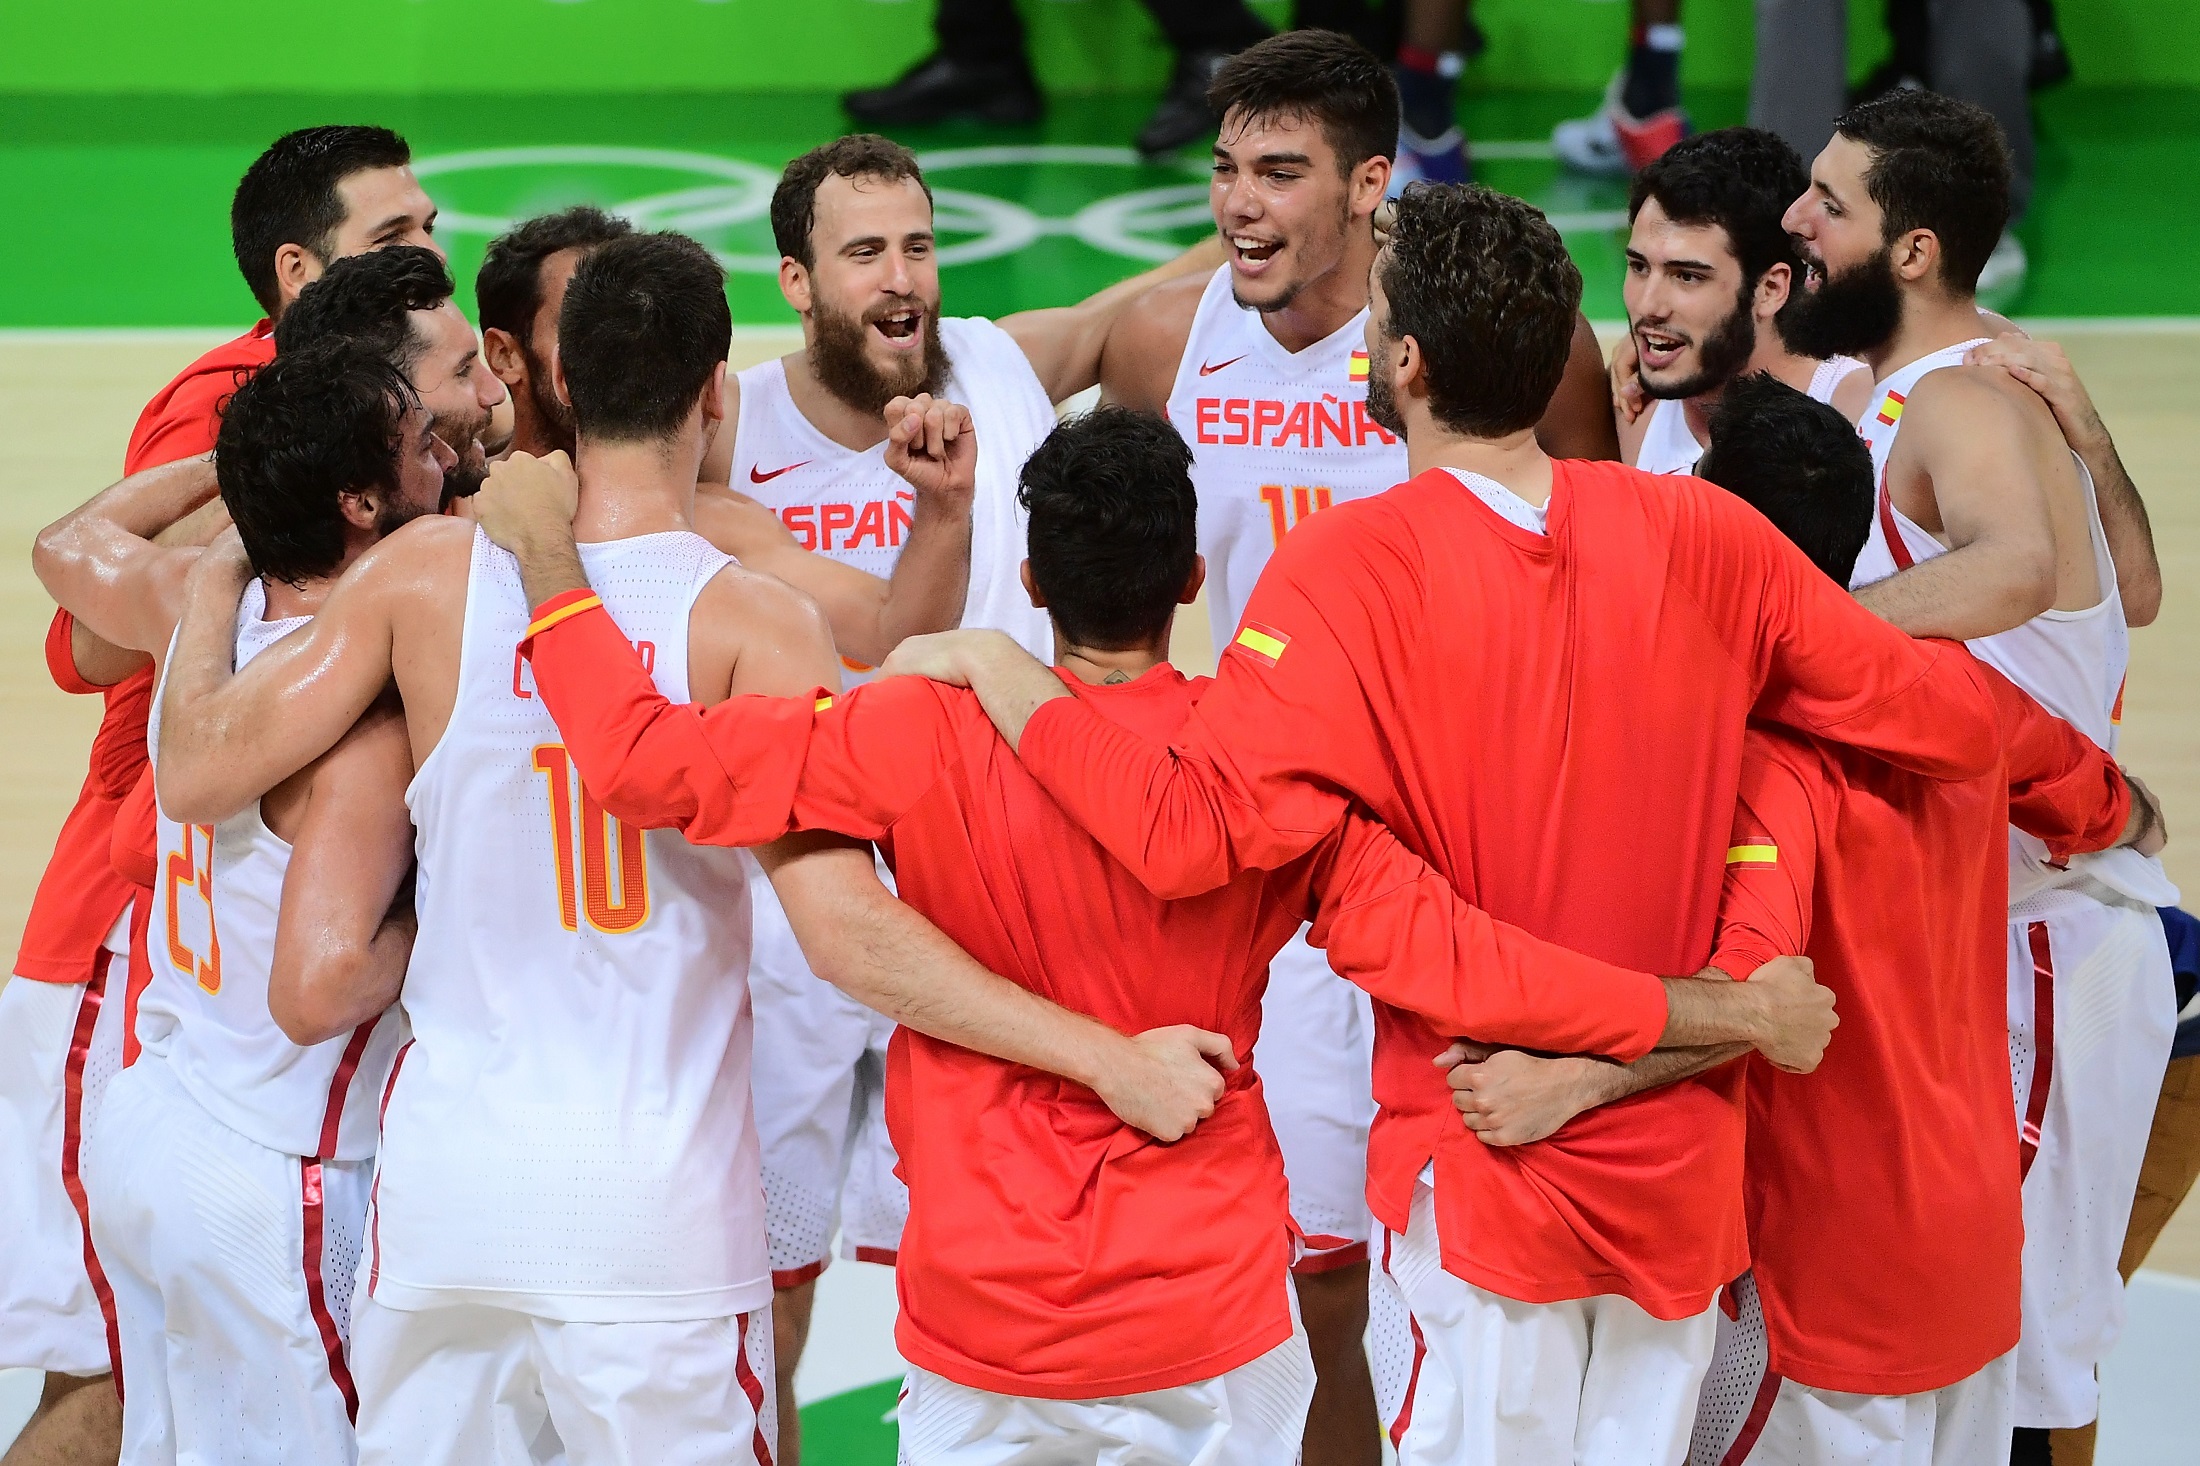 Spain's point guard Sergio Rodriguez (Rear L) and Spain's centre Willy Hernangomez (Rear R) and teammates celebrate after defating France during a Men's quarterfinal basketball match between Spain and France at the Carioca Arena 1 in Rio de Janeiro on August 17, 2016 during the Rio 2016 Olympic Games. / AFP / EMMANUEL DUNAND (Photo credit should read EMMANUEL DUNAND/AFP/Getty Images)